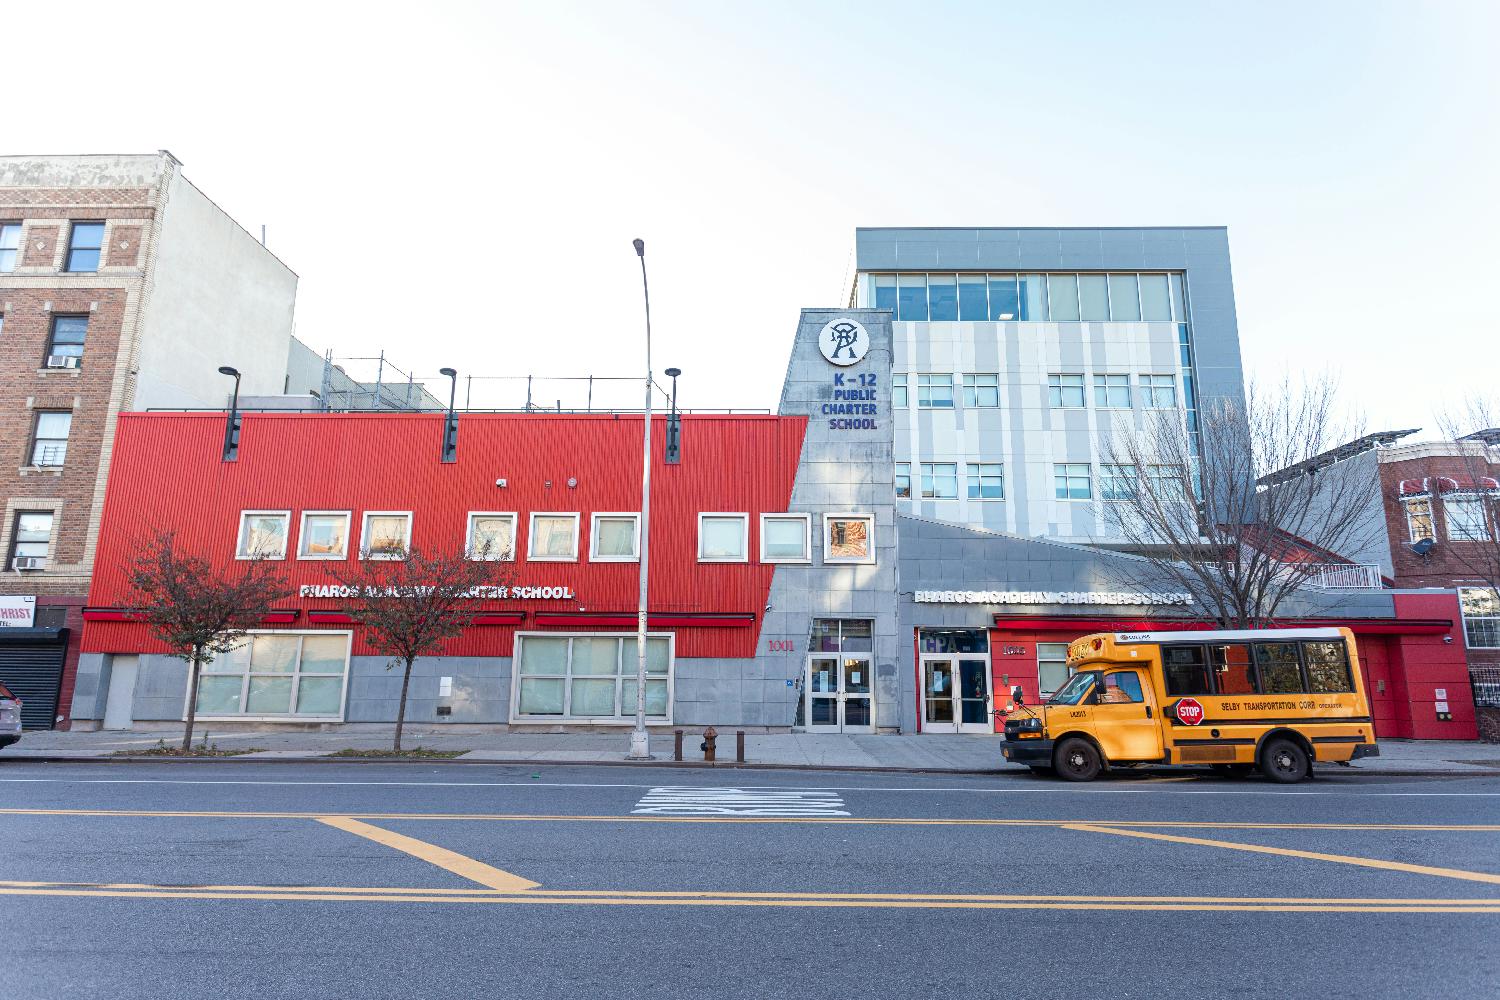 Our school continues to be a beacon of light in the Bronx community we serve.